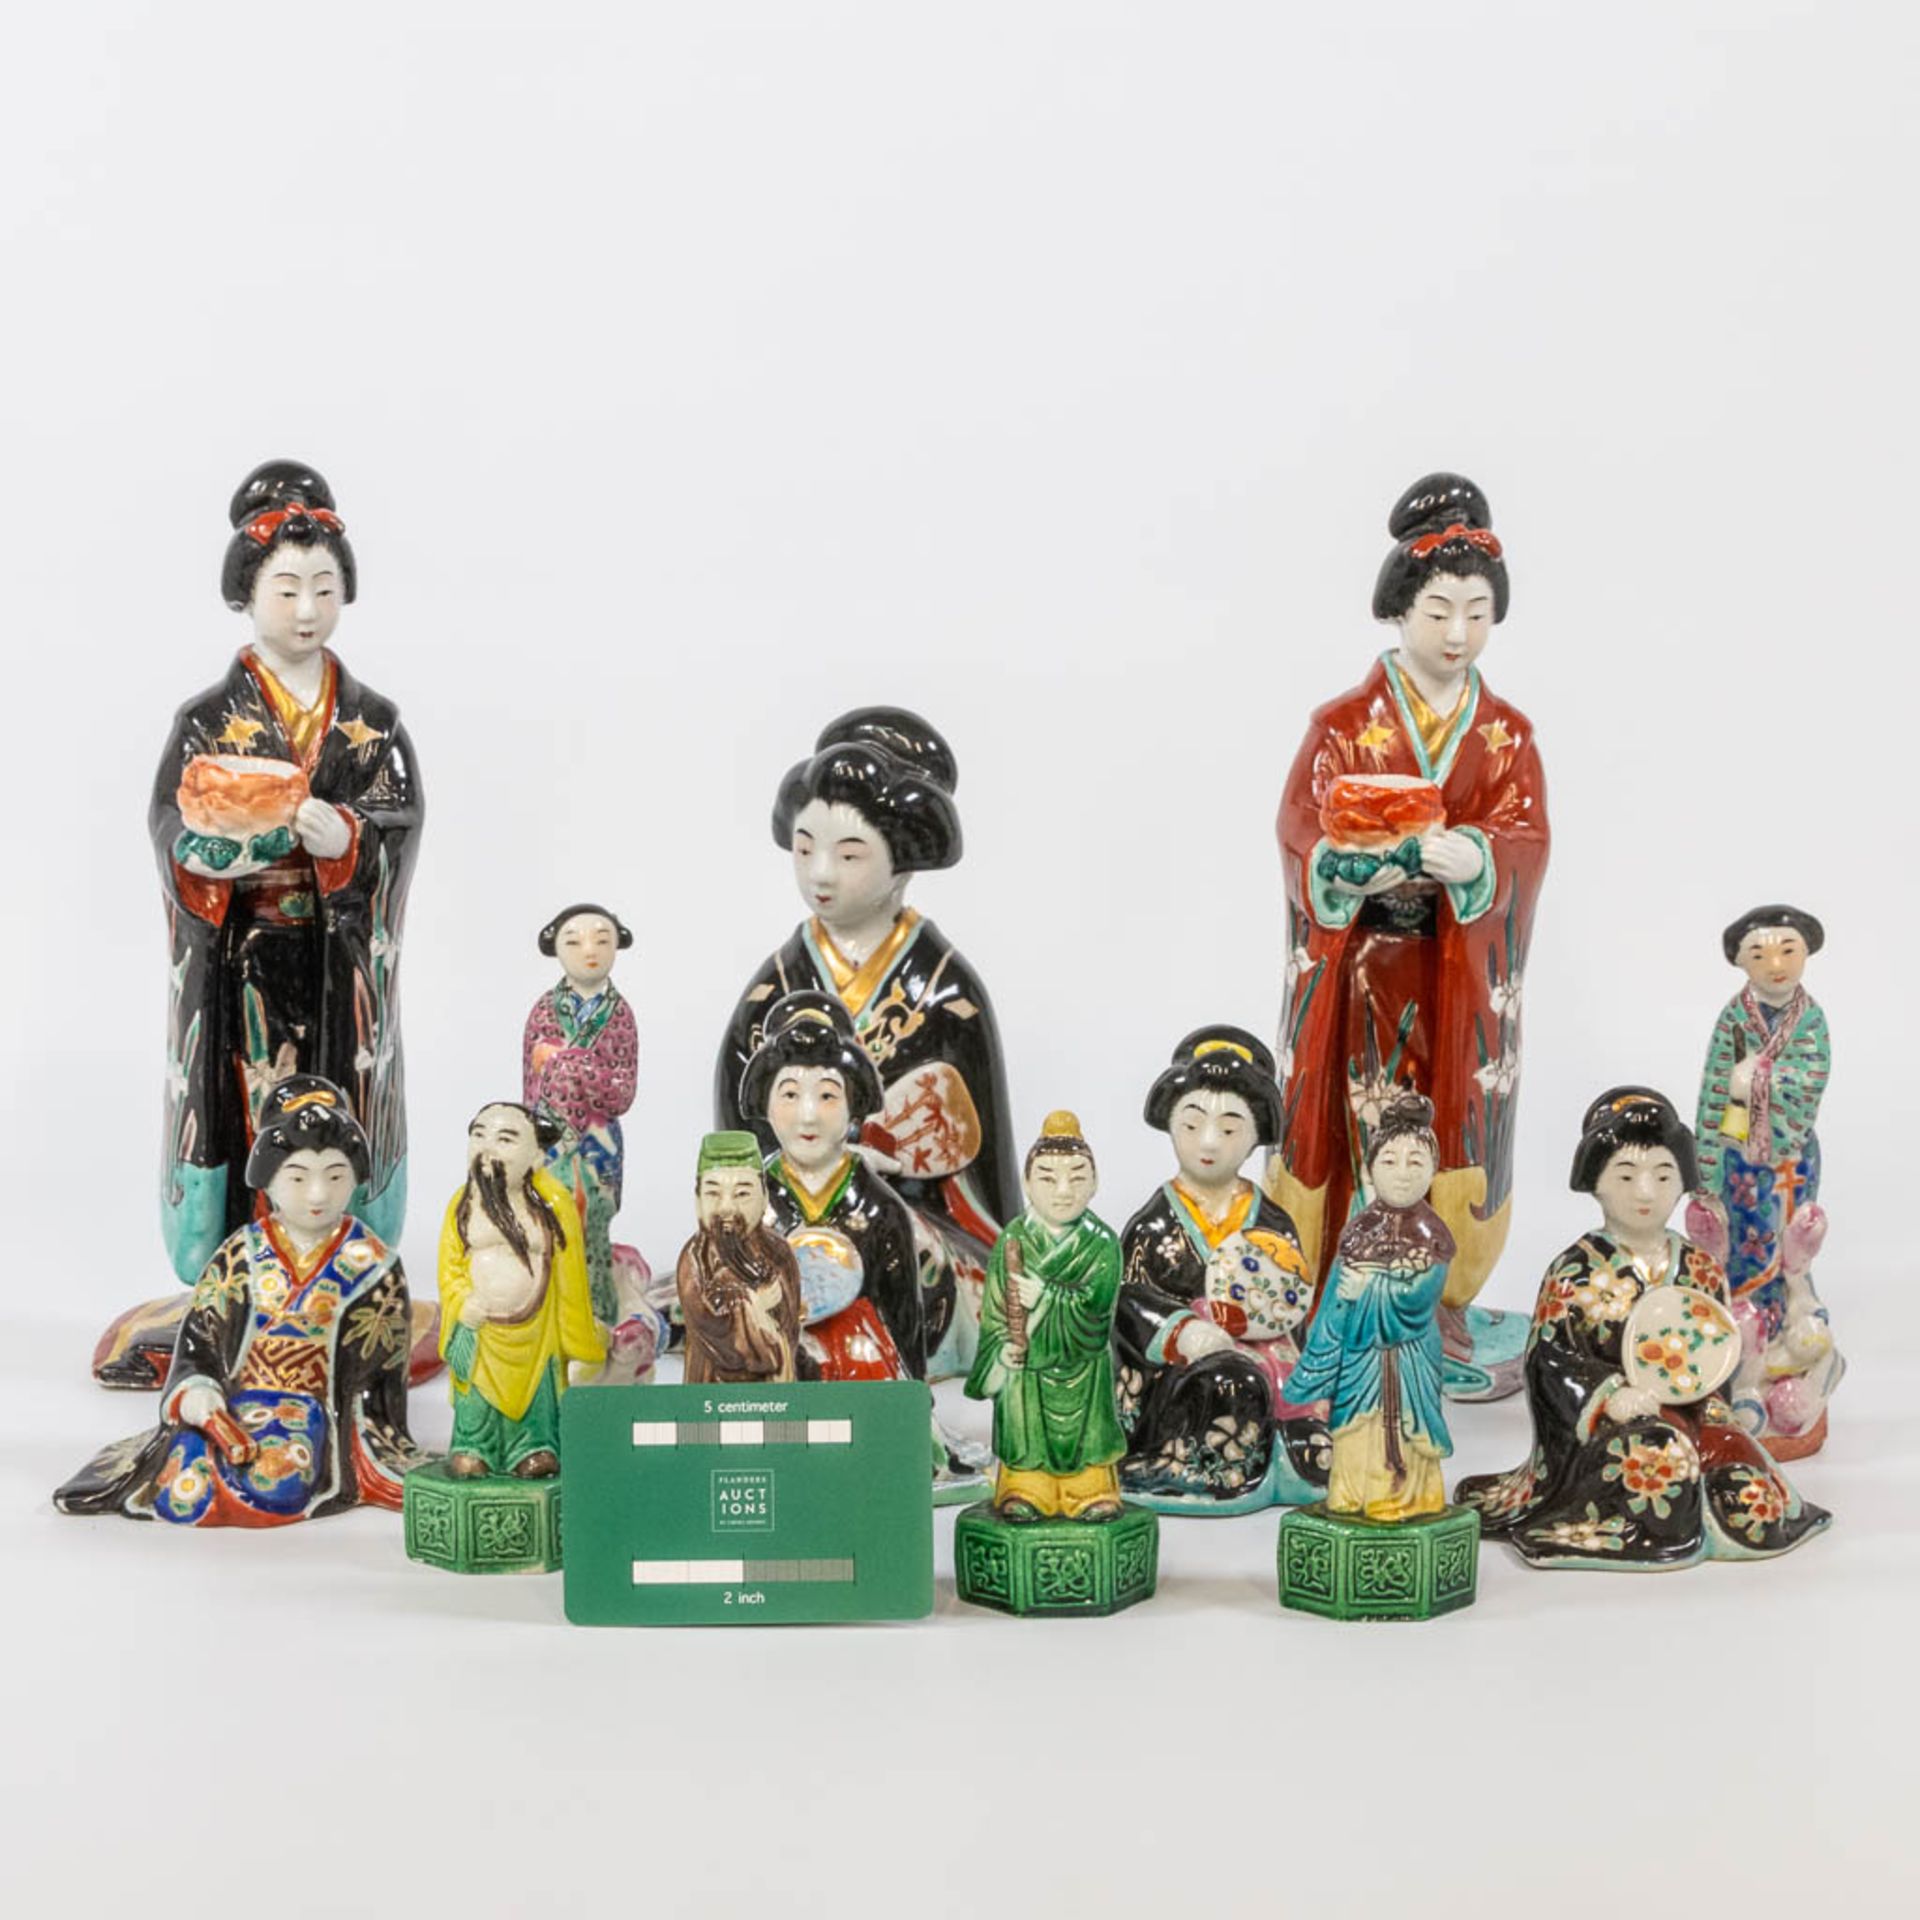 A collection of 13 Chinese and Japanese statues made of porcelain and ceramics. (10 x 11 x 25 cm) - Bild 12 aus 17